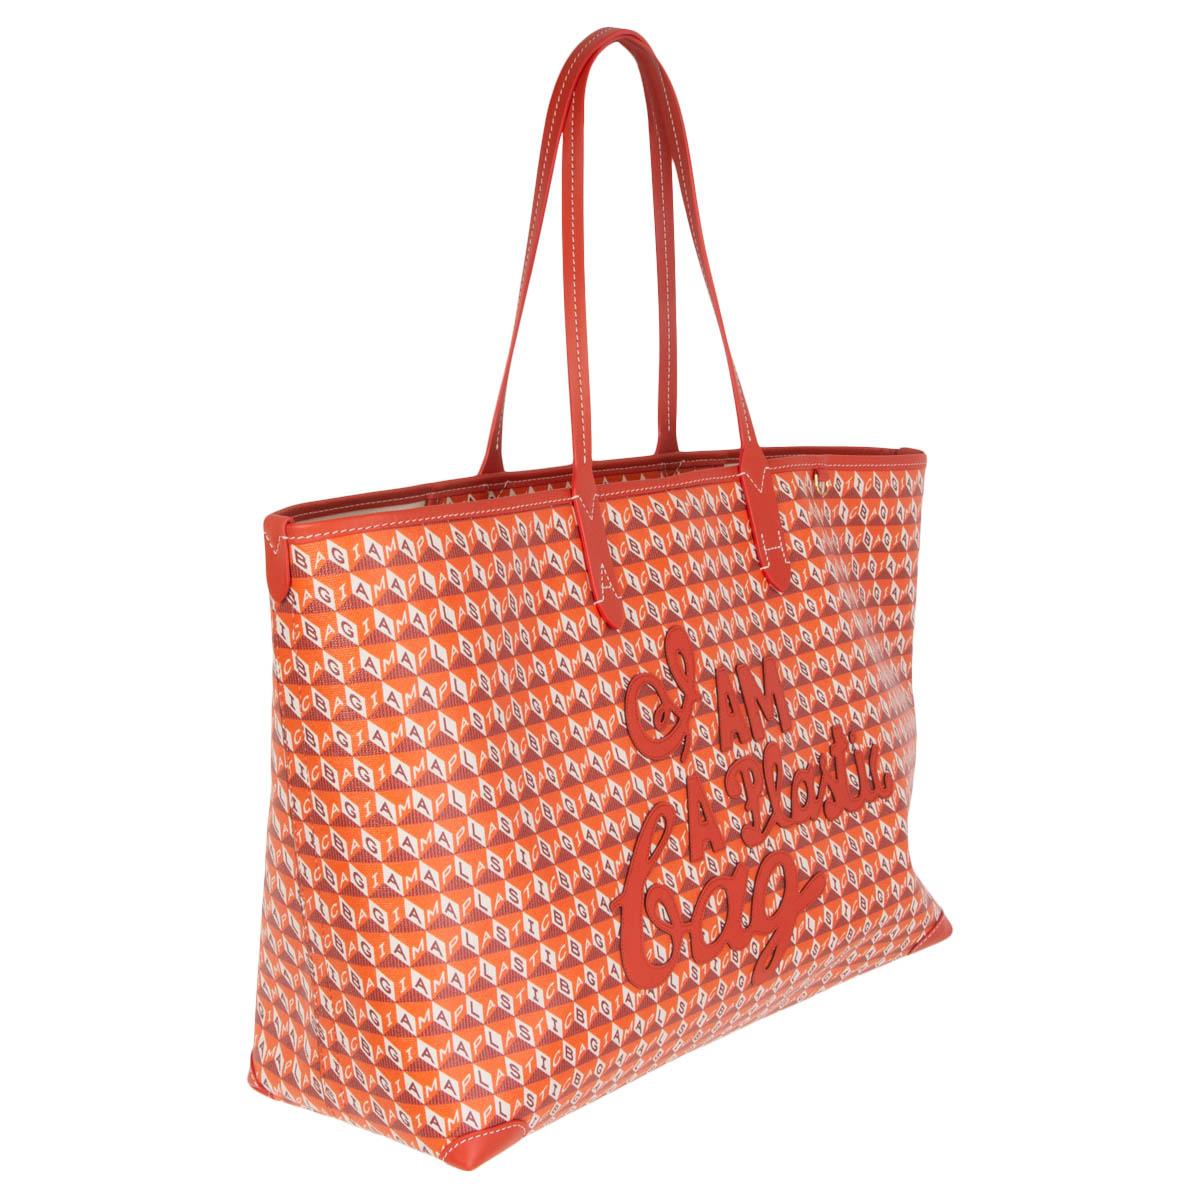 100% authentic Anya Hindmarch 'I Am A Plastic Bag' tote bag made from white, orange and burgundy coated-canvas sourced from 32 half-liter bottles found in landfills. The handles and hand-cut appliqués on this large tote meet the standards of a